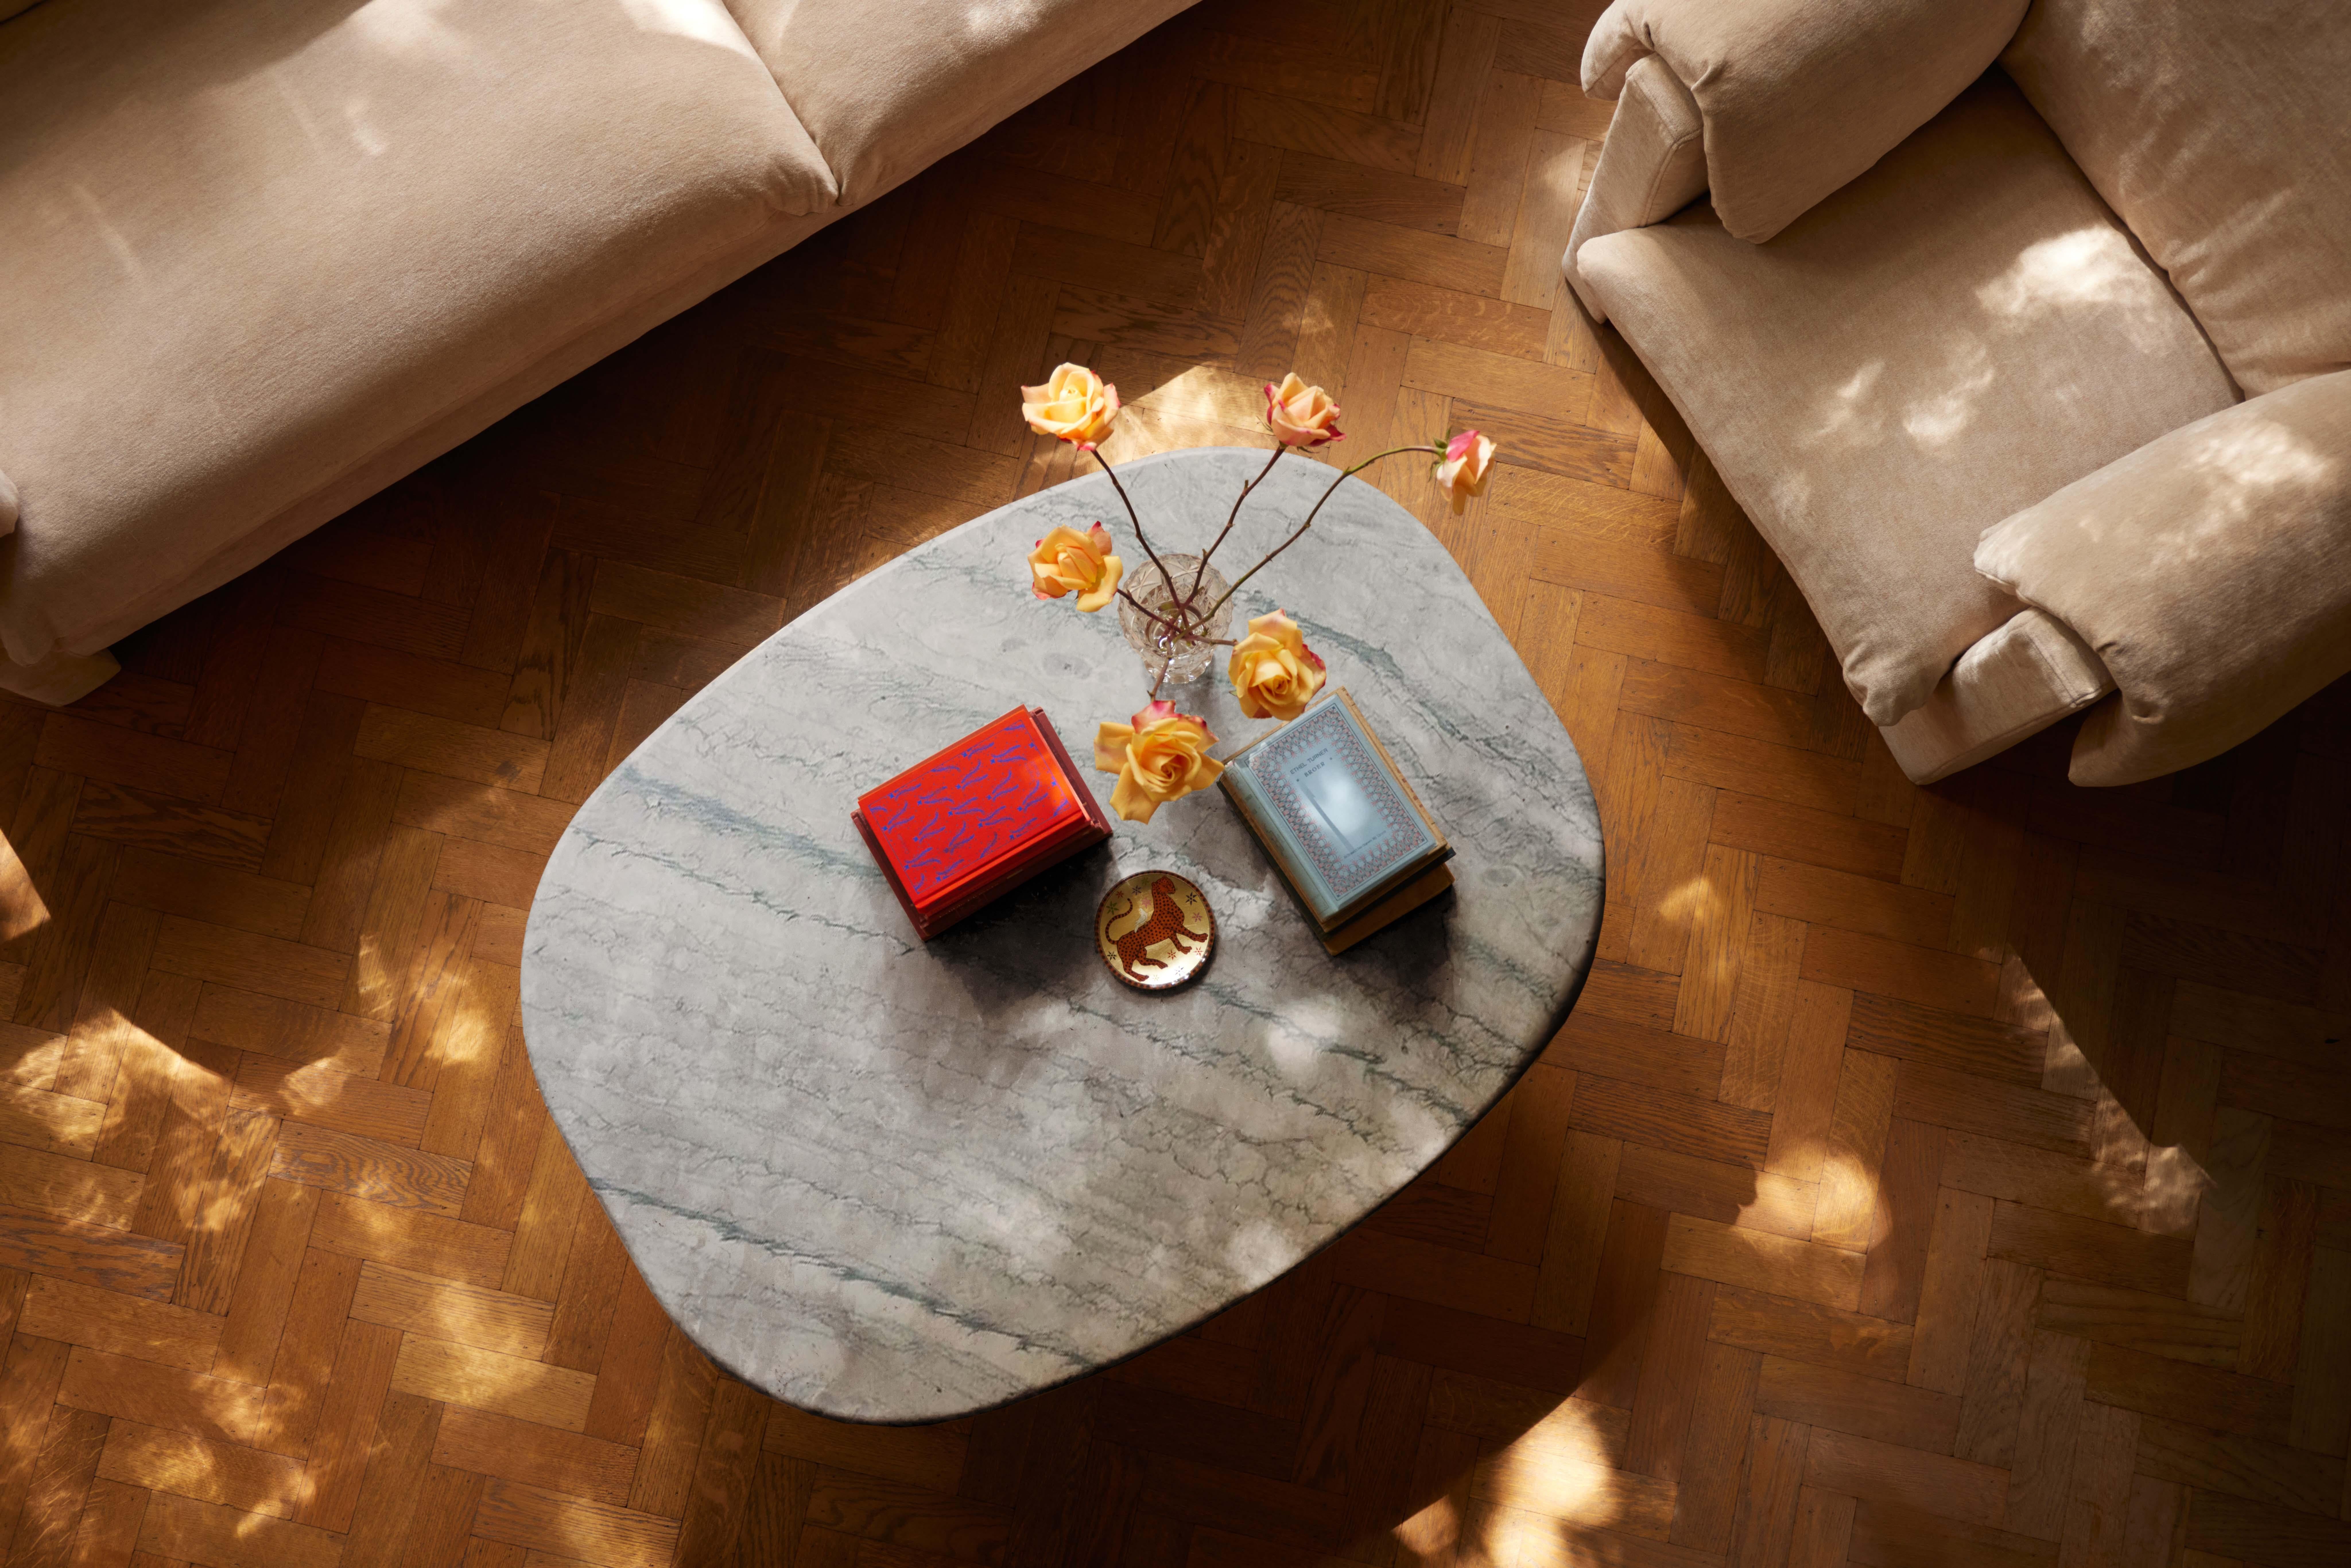 The Circa is made by master craftsmen in Italy.

We hold the belief that the essence of a place—the inanimate objects and the intricacies of design—can profoundly influence one's experience. With the introduction of the Circa coffee table, our